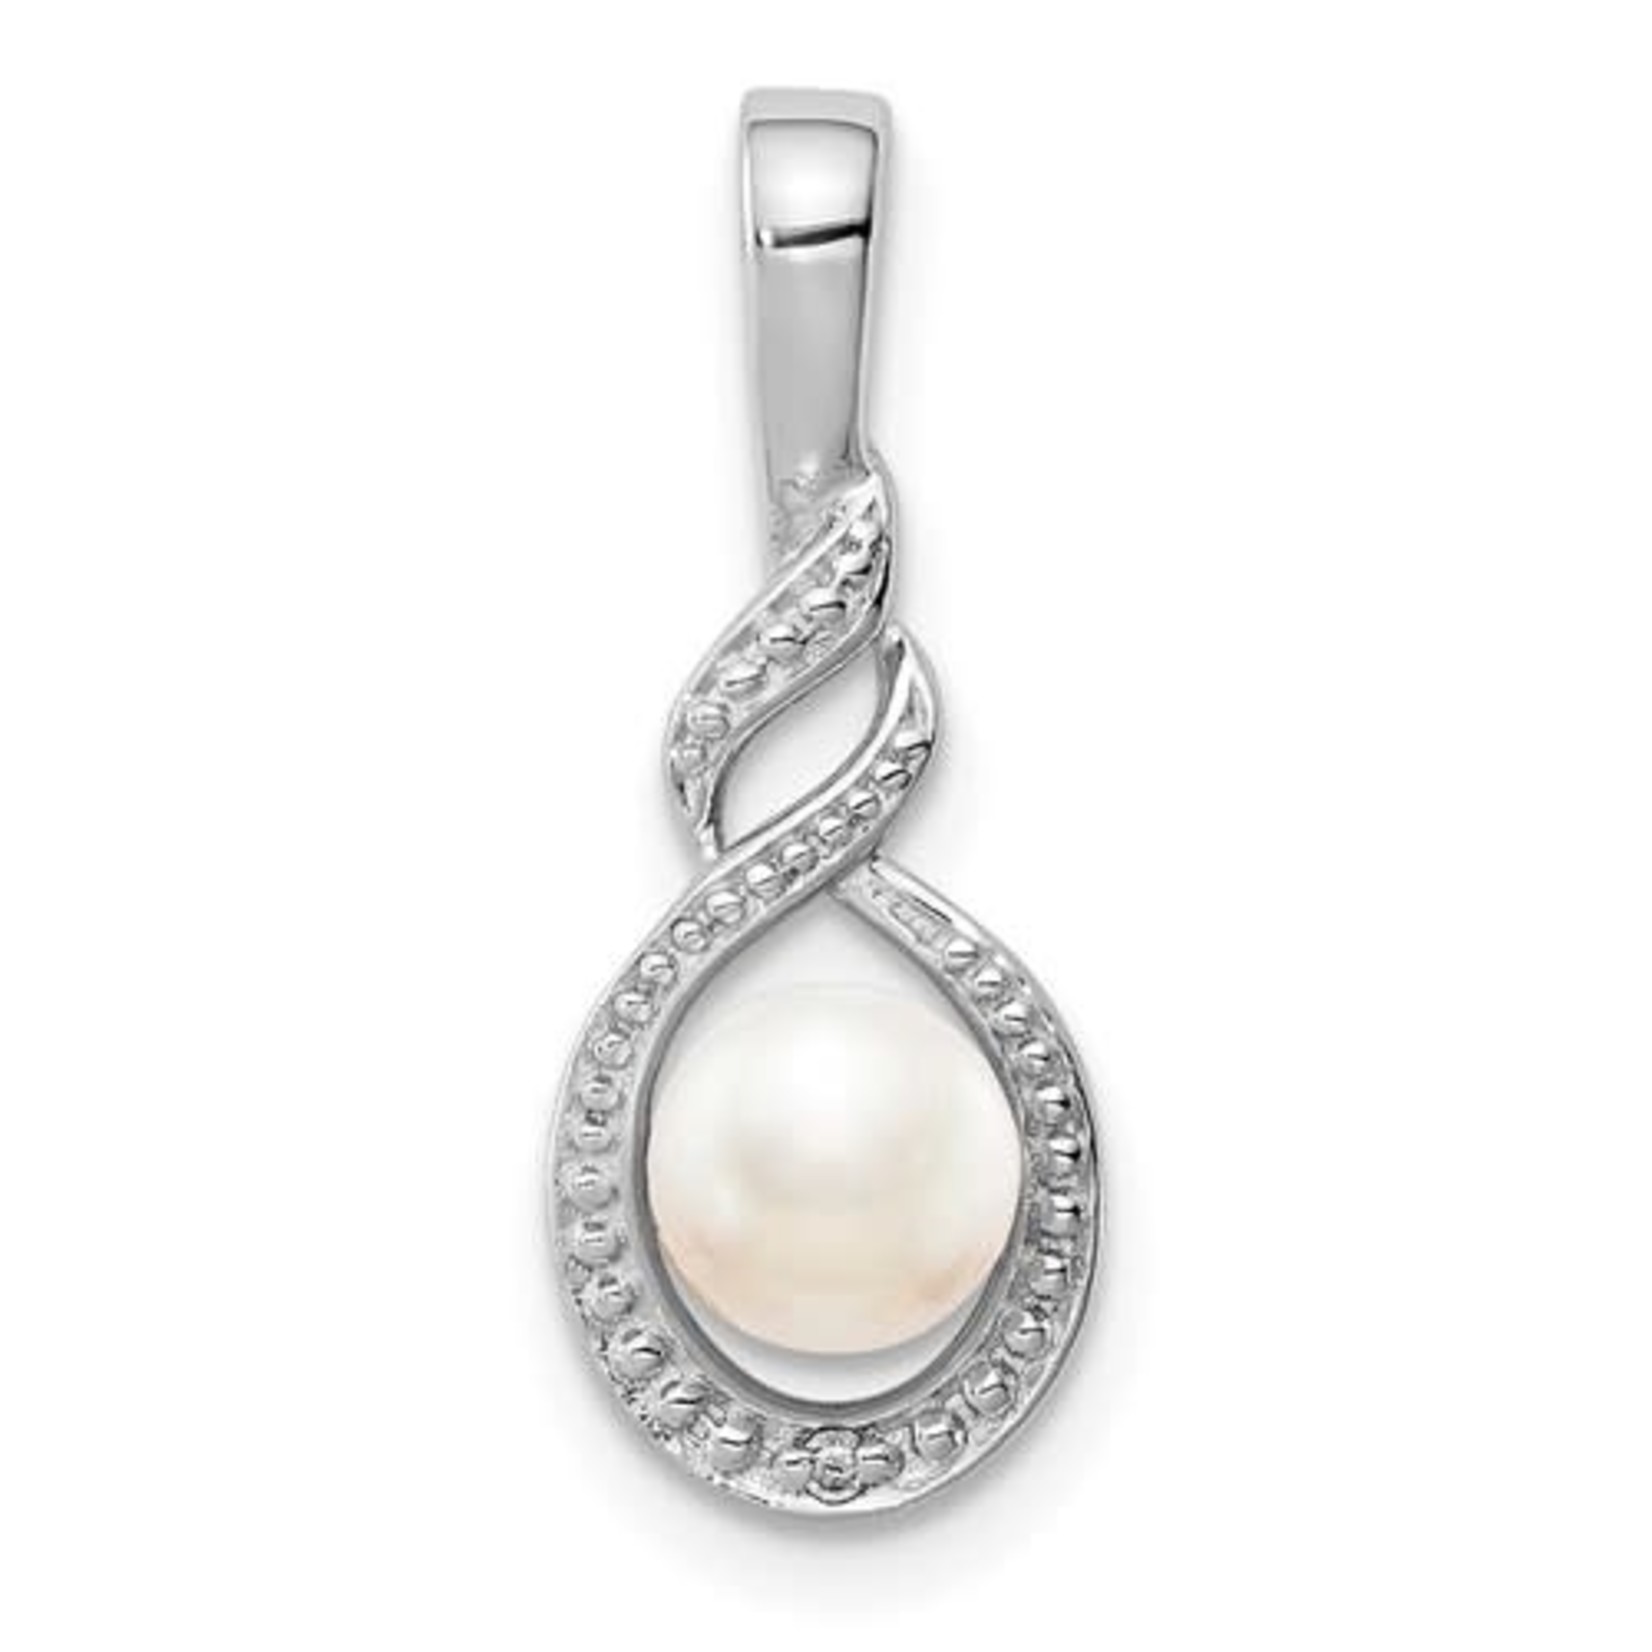 QUALITY GOLD OF CINCINNATI INC Sterling Silver Rhodium Plated Pearl and Diamond Pendant w/Chain